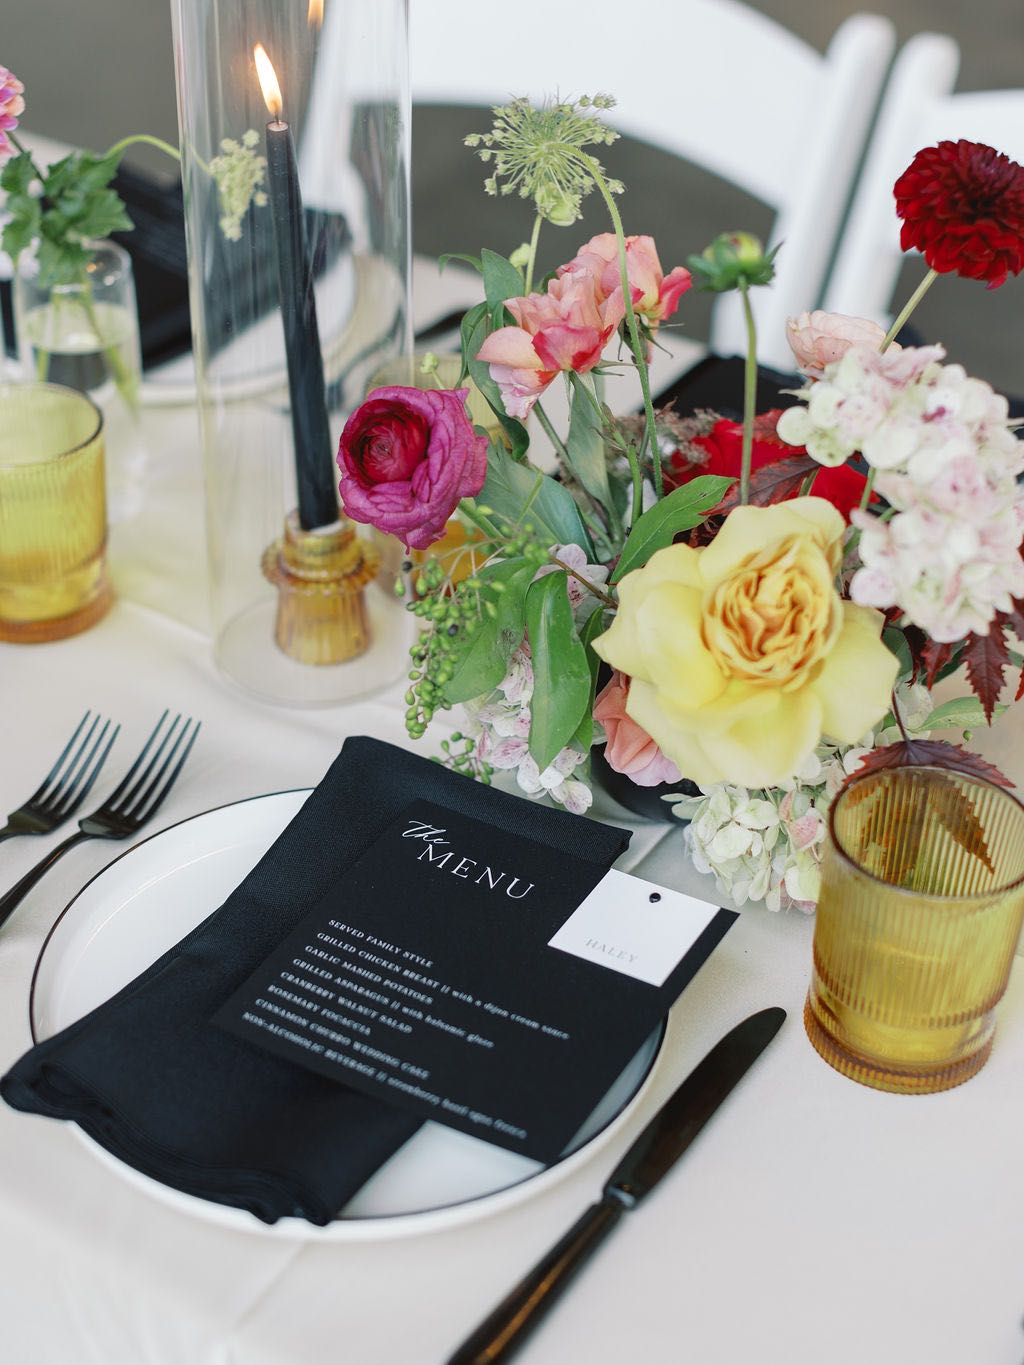 Wedding place setting with black napkin, menu and flatware and amber glassware. Colorful flowers down the center